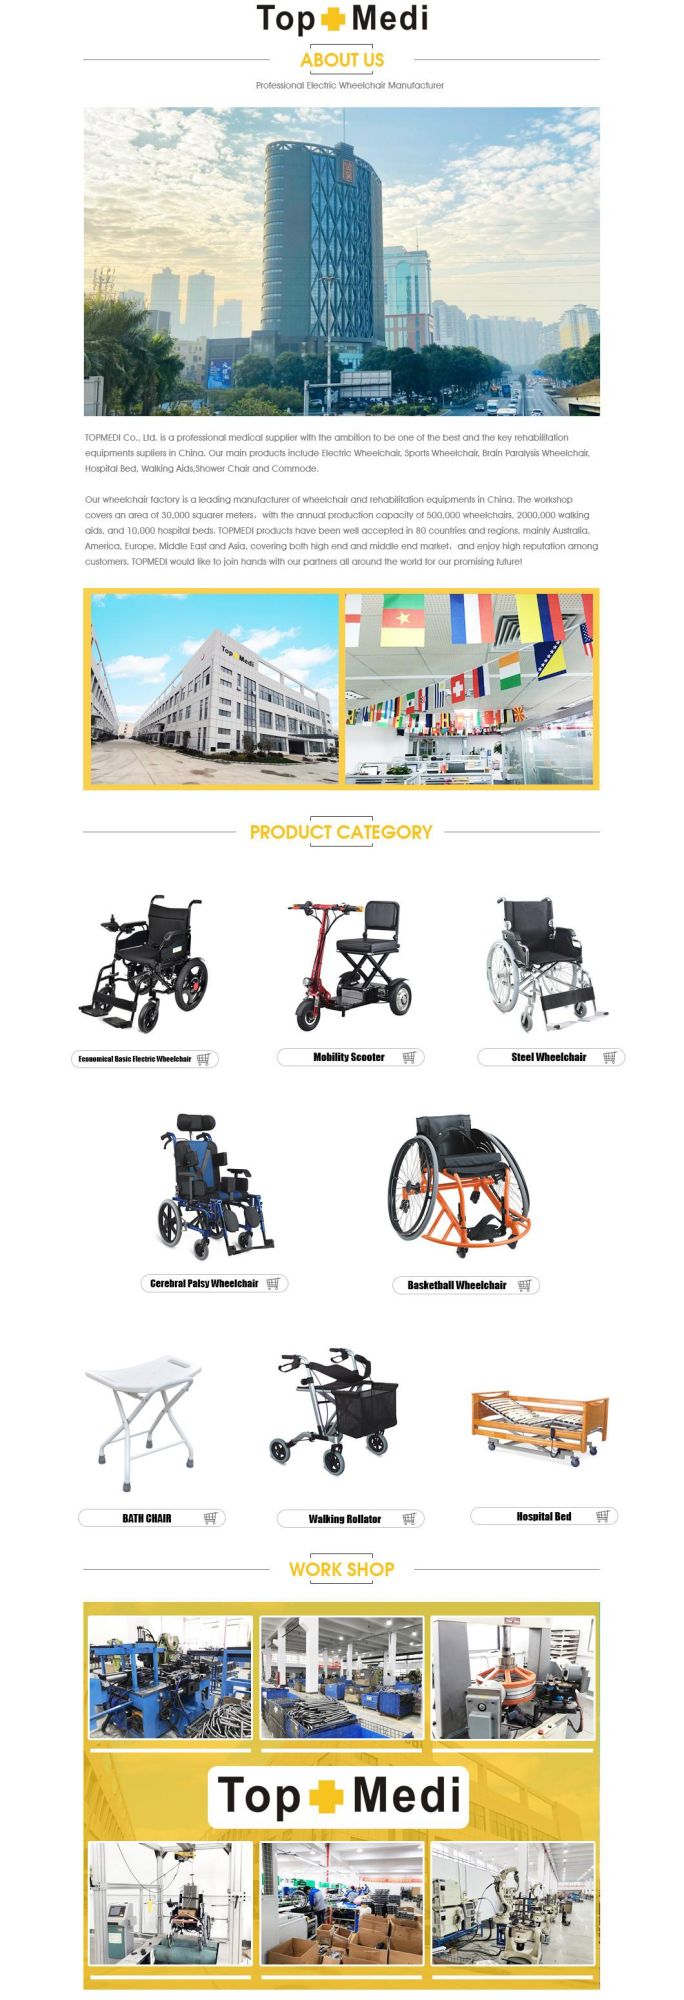 Hot Elderly Multi-Function Transfer Wheelchairs Transferring Patient to LED Examination Light Commode Wheelchair